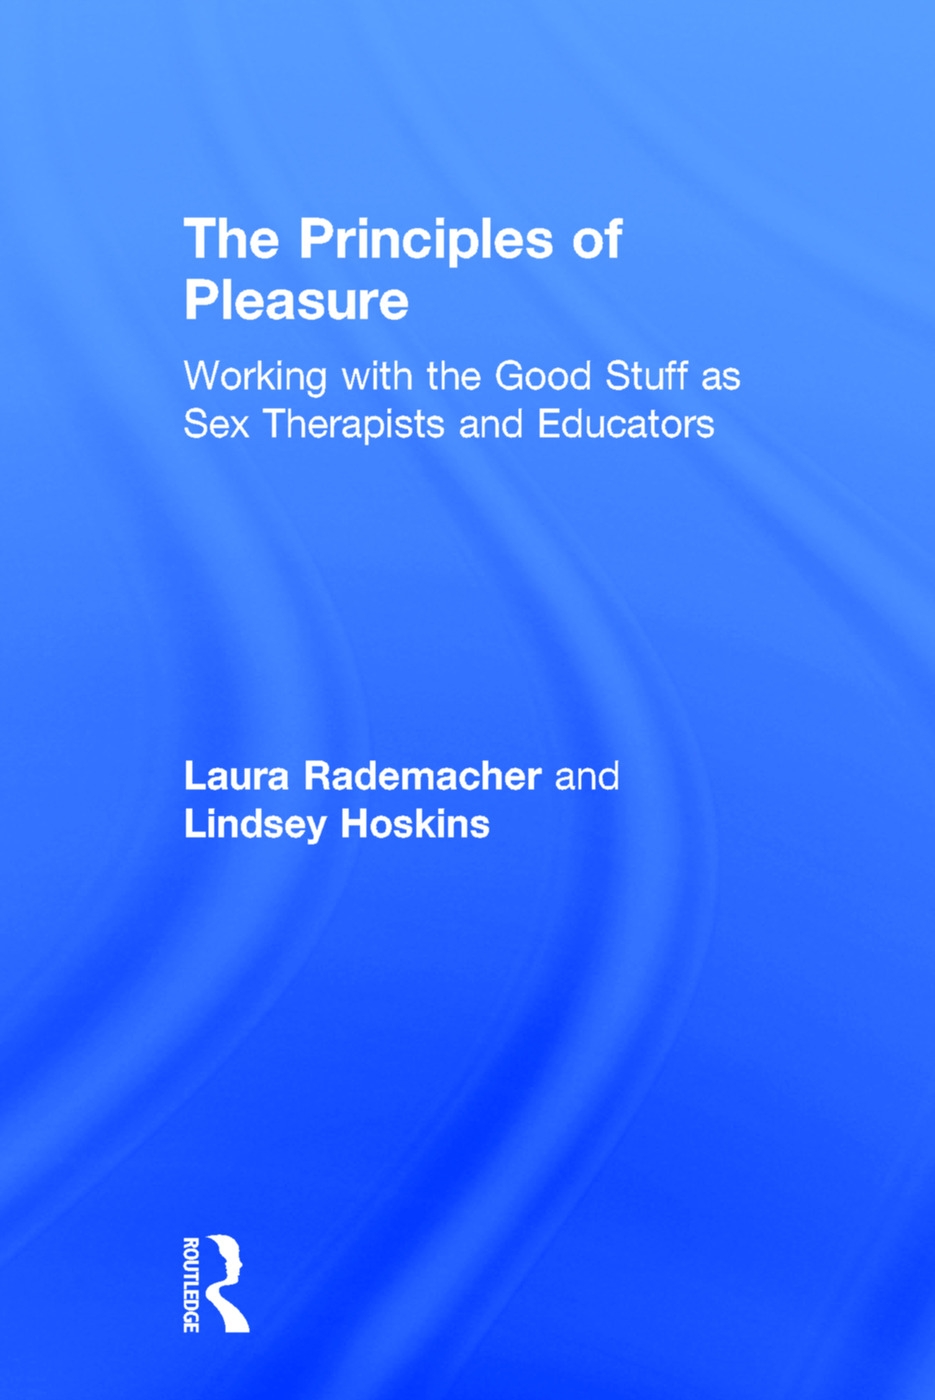 The Principles of Pleasure: Working with the Good Stuff as Sex Therapists and Educators